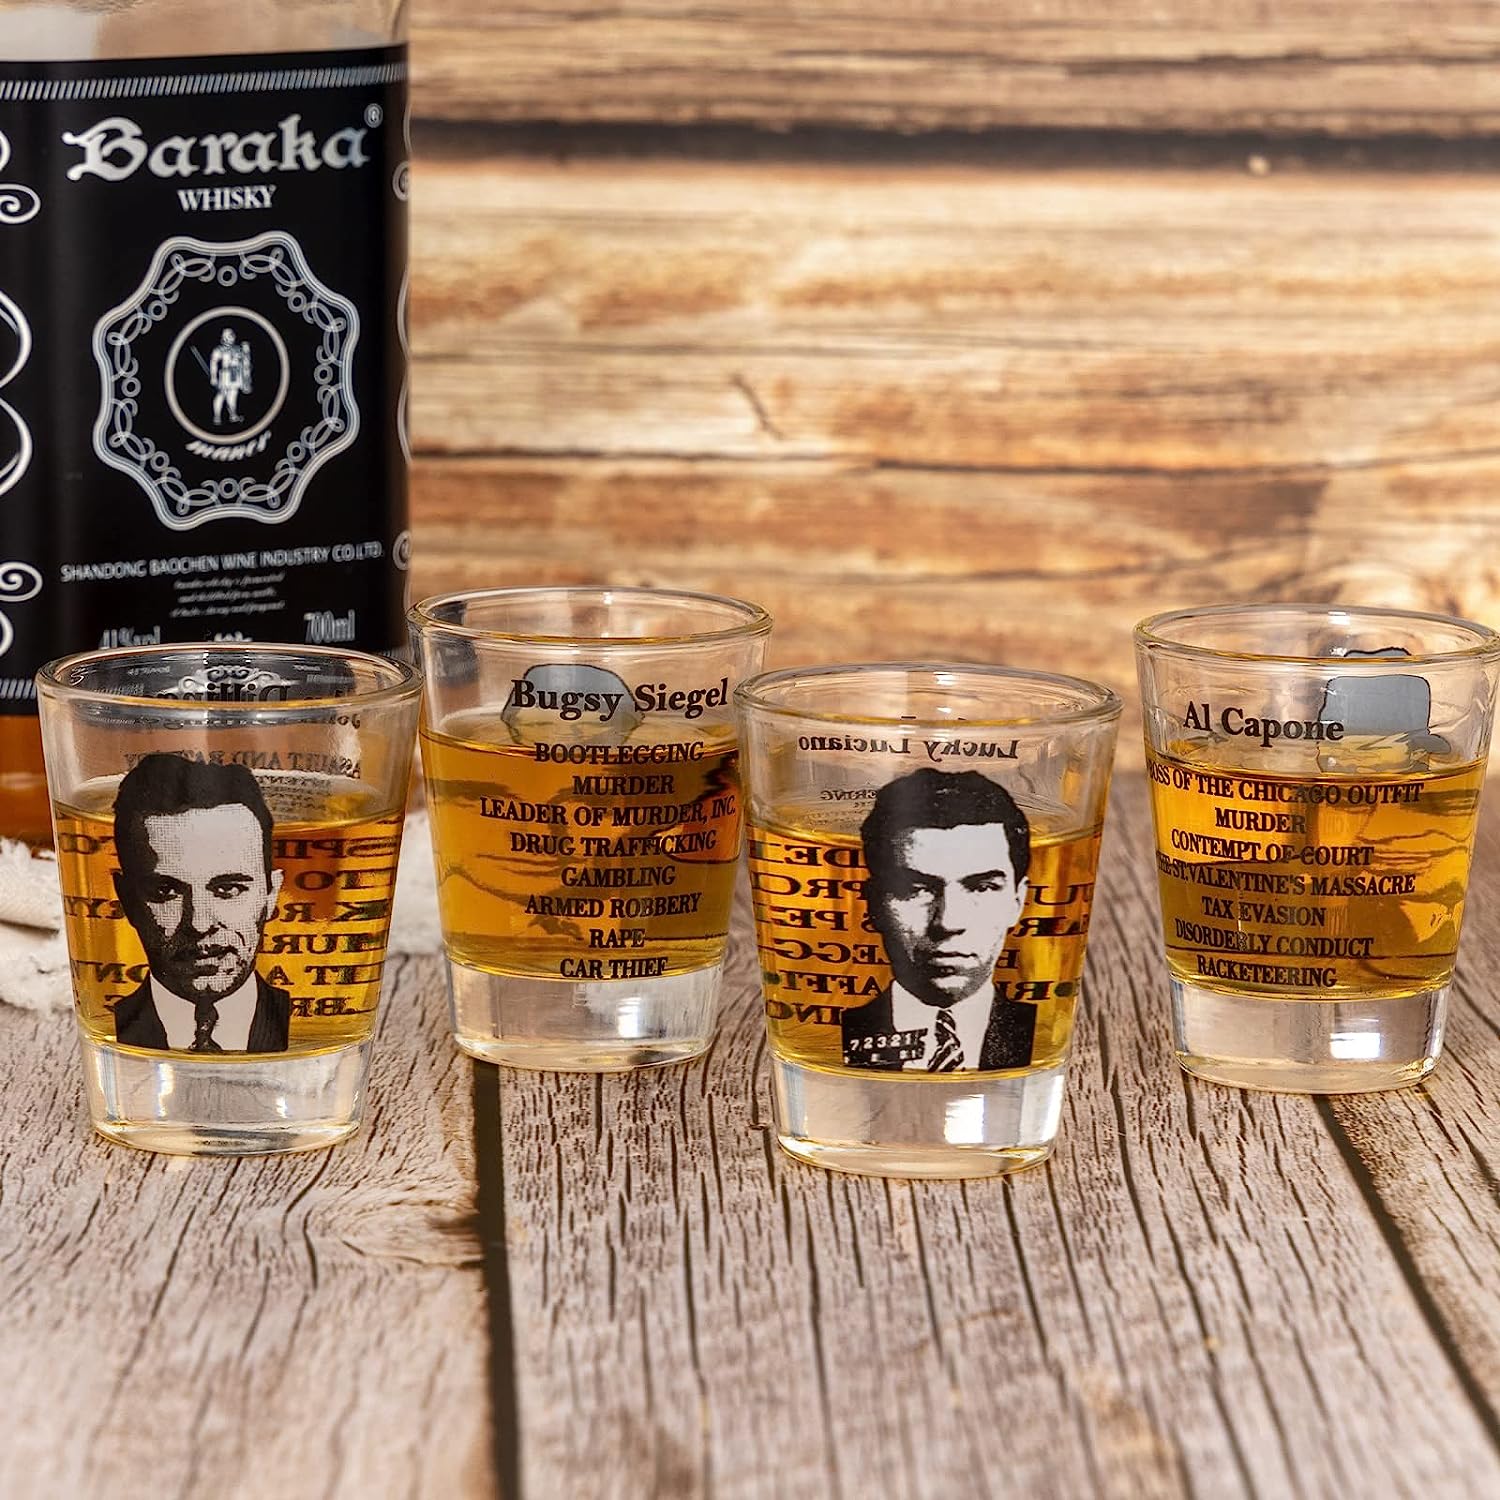 Set of shot glasses inspired by classic gangster culture. Each shot glass features a unique design, reminiscent of iconic elements from gangster movies. The set includes multiple shot glasses, each with its own distinctive graphic.